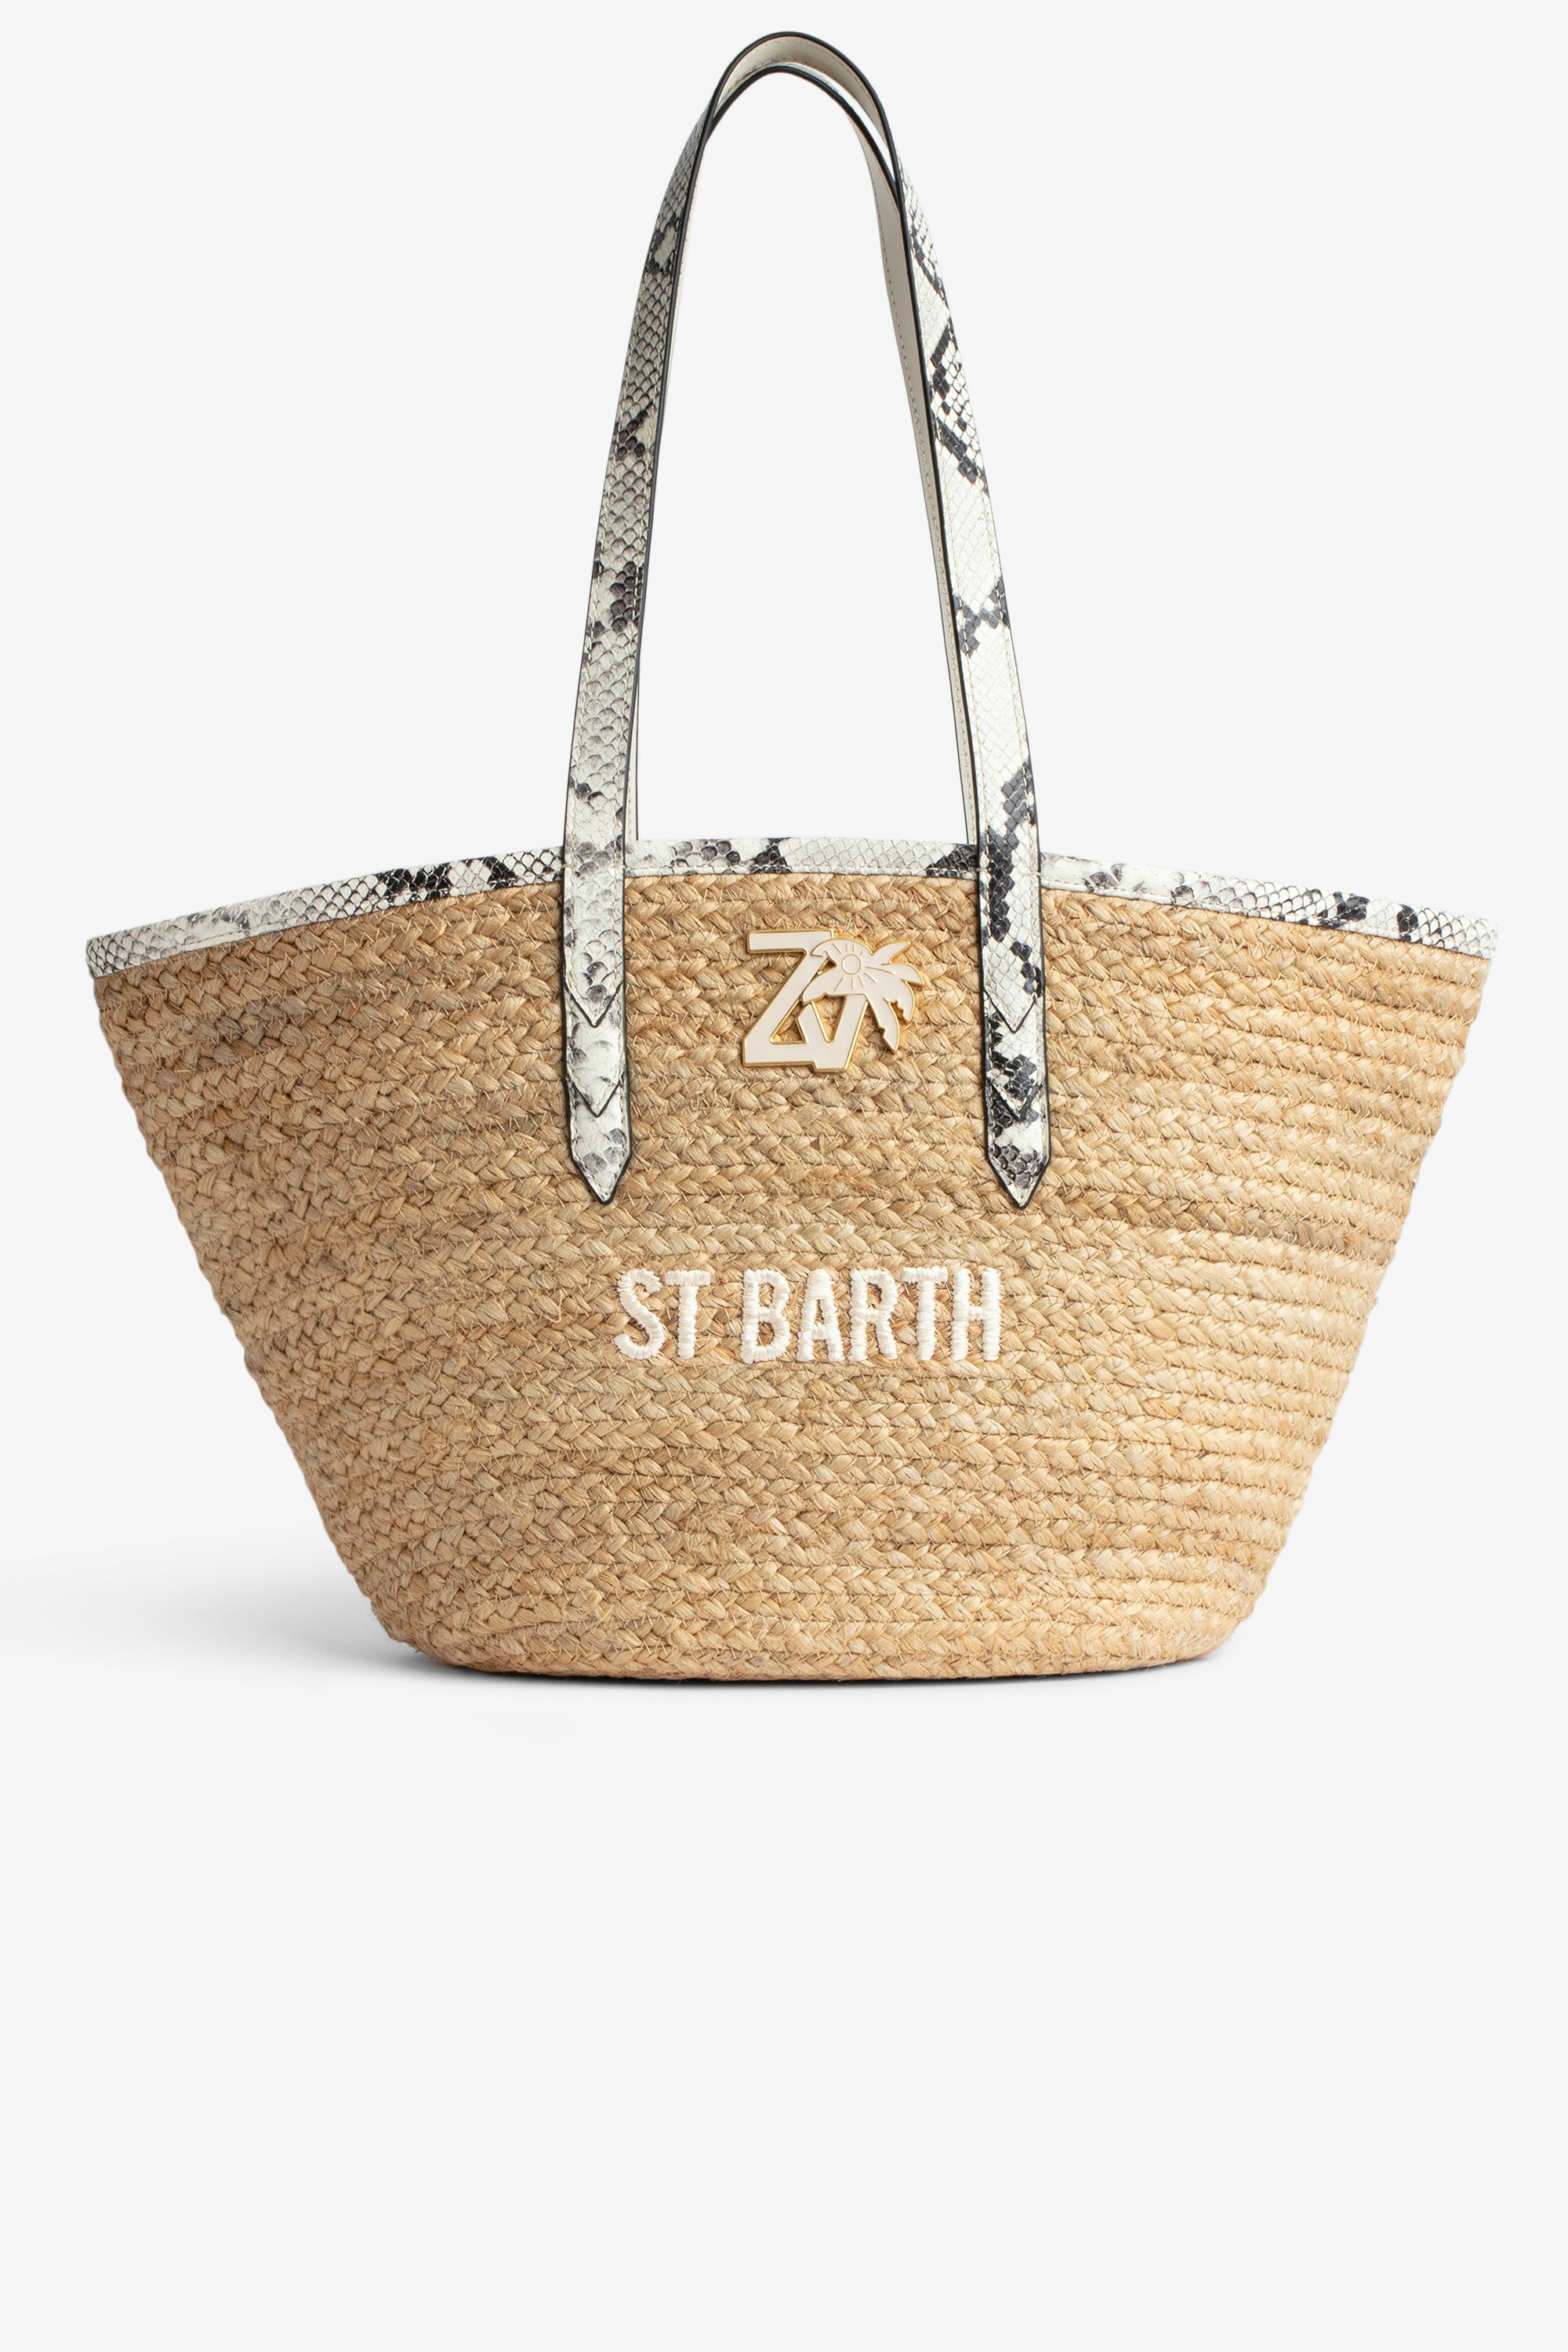 Le Beach Bag - Women's straw bag with off-white snakeskin-effect leather handles, "St Barth" embroidery and ZV charm